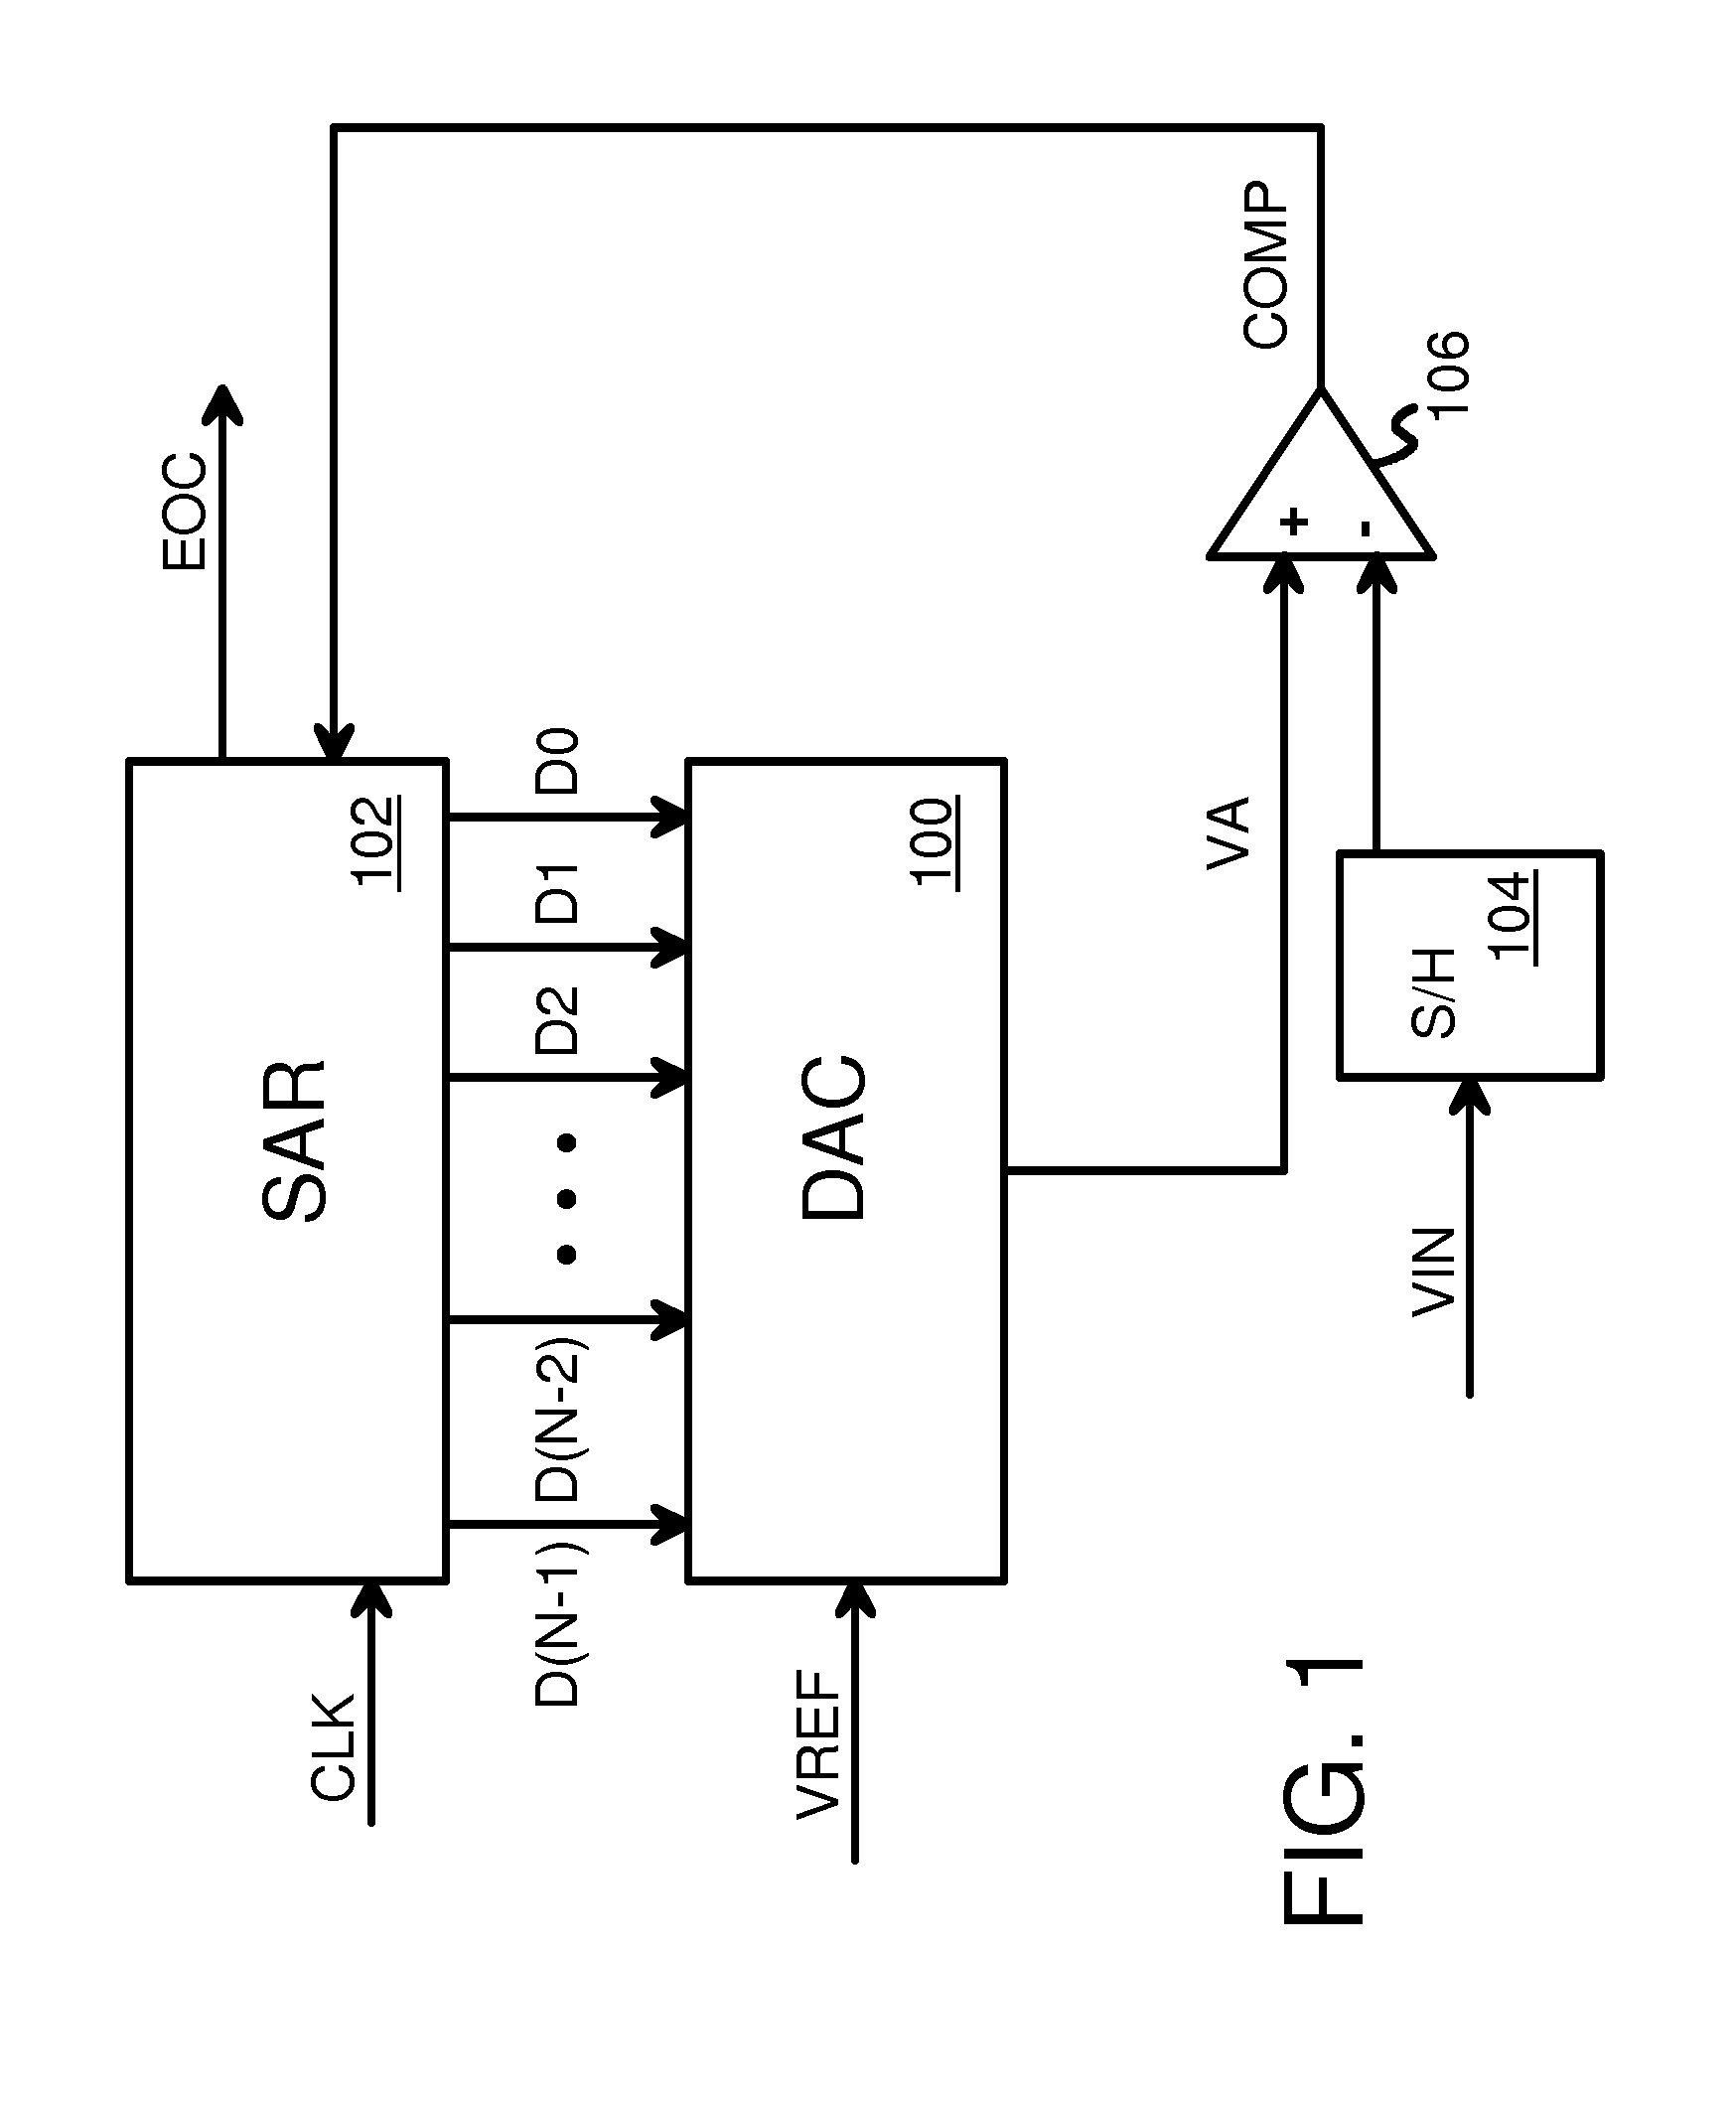 Loading-free multi-stage SAR-assisted pipeline ADC that eliminates amplifier load by re-using second-stage switched capacitors as amplifier feedback capacitor